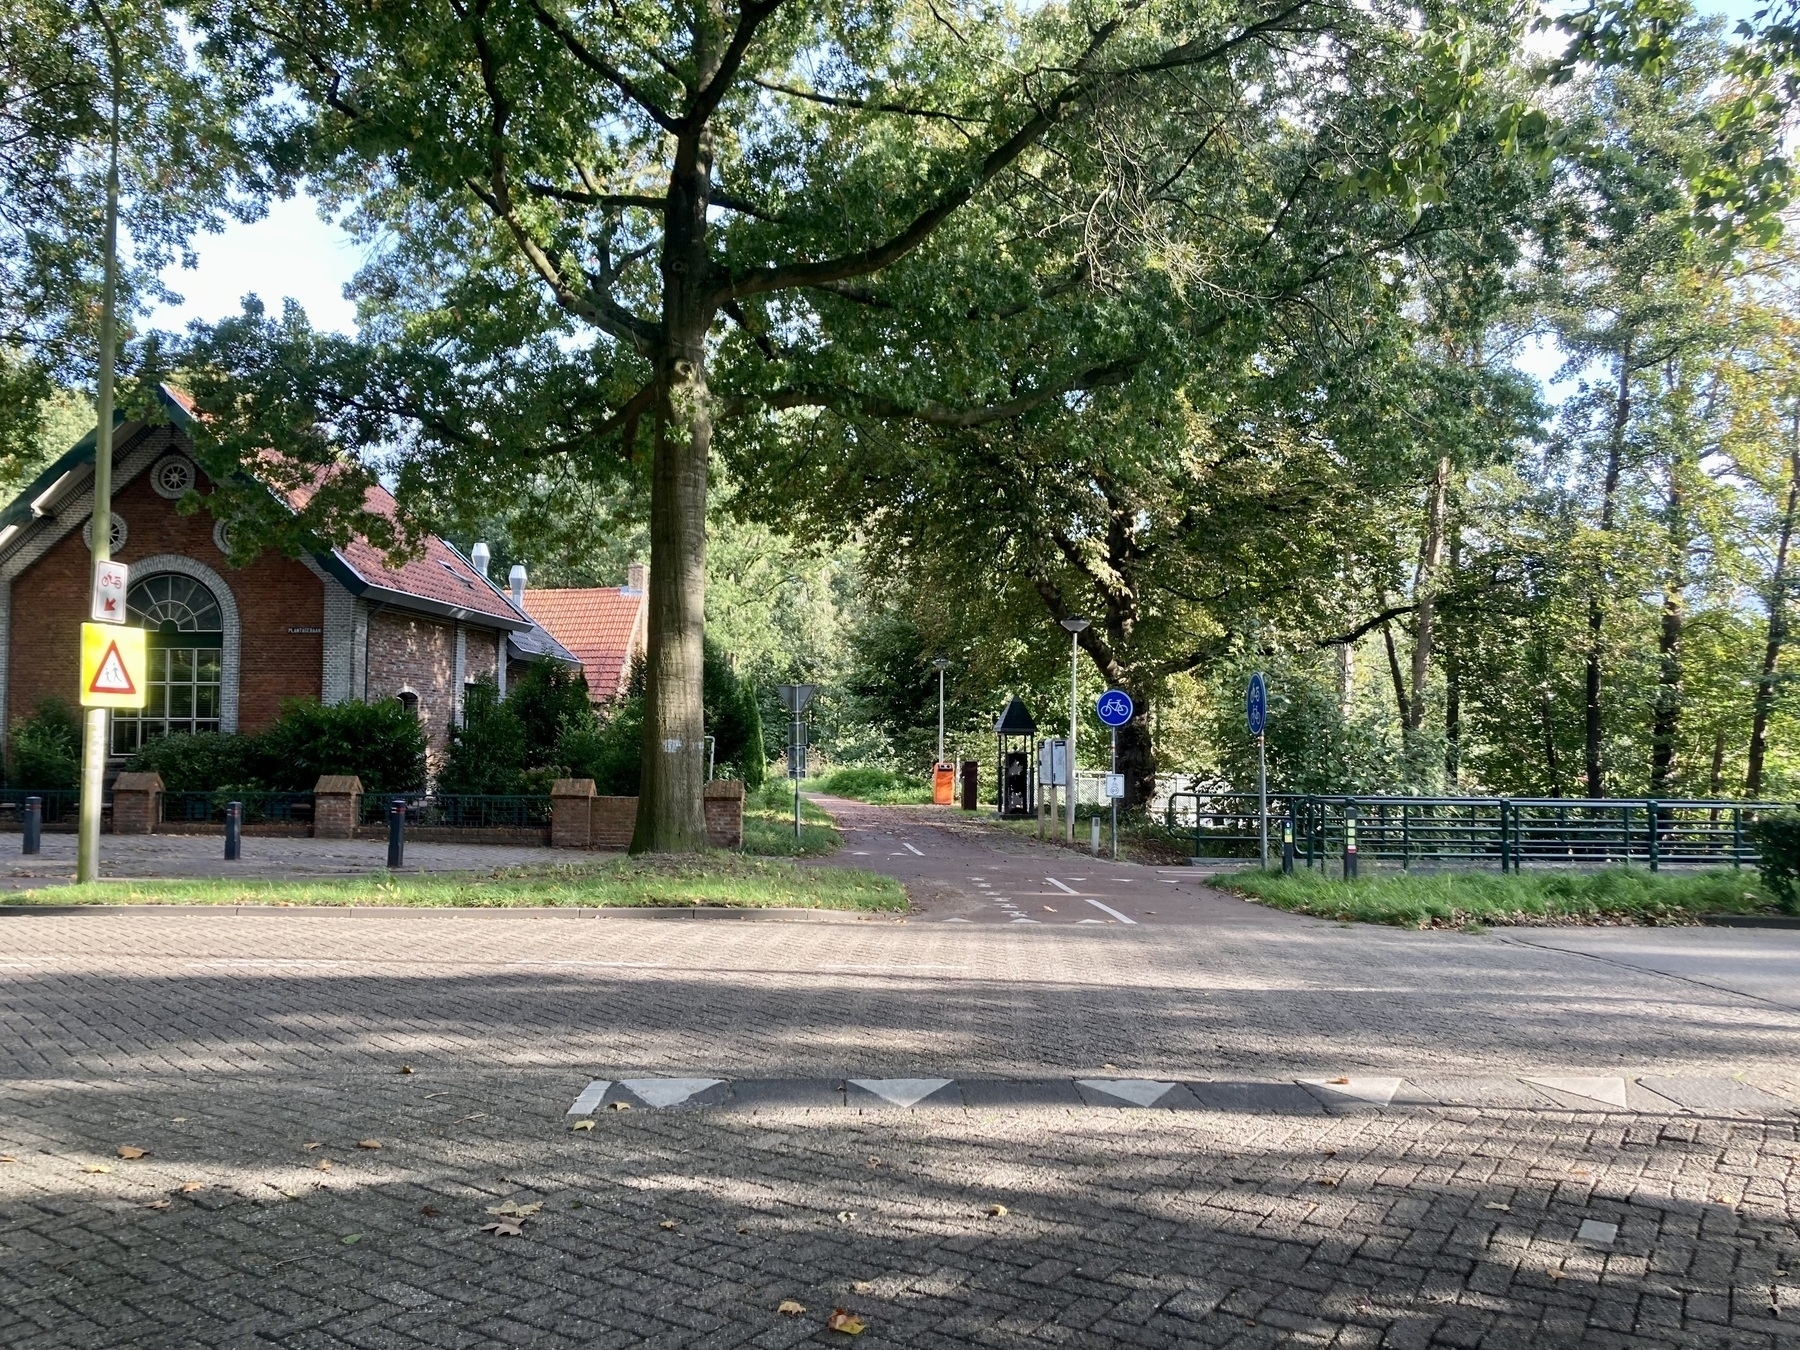 Crossing of a cycle path and a road